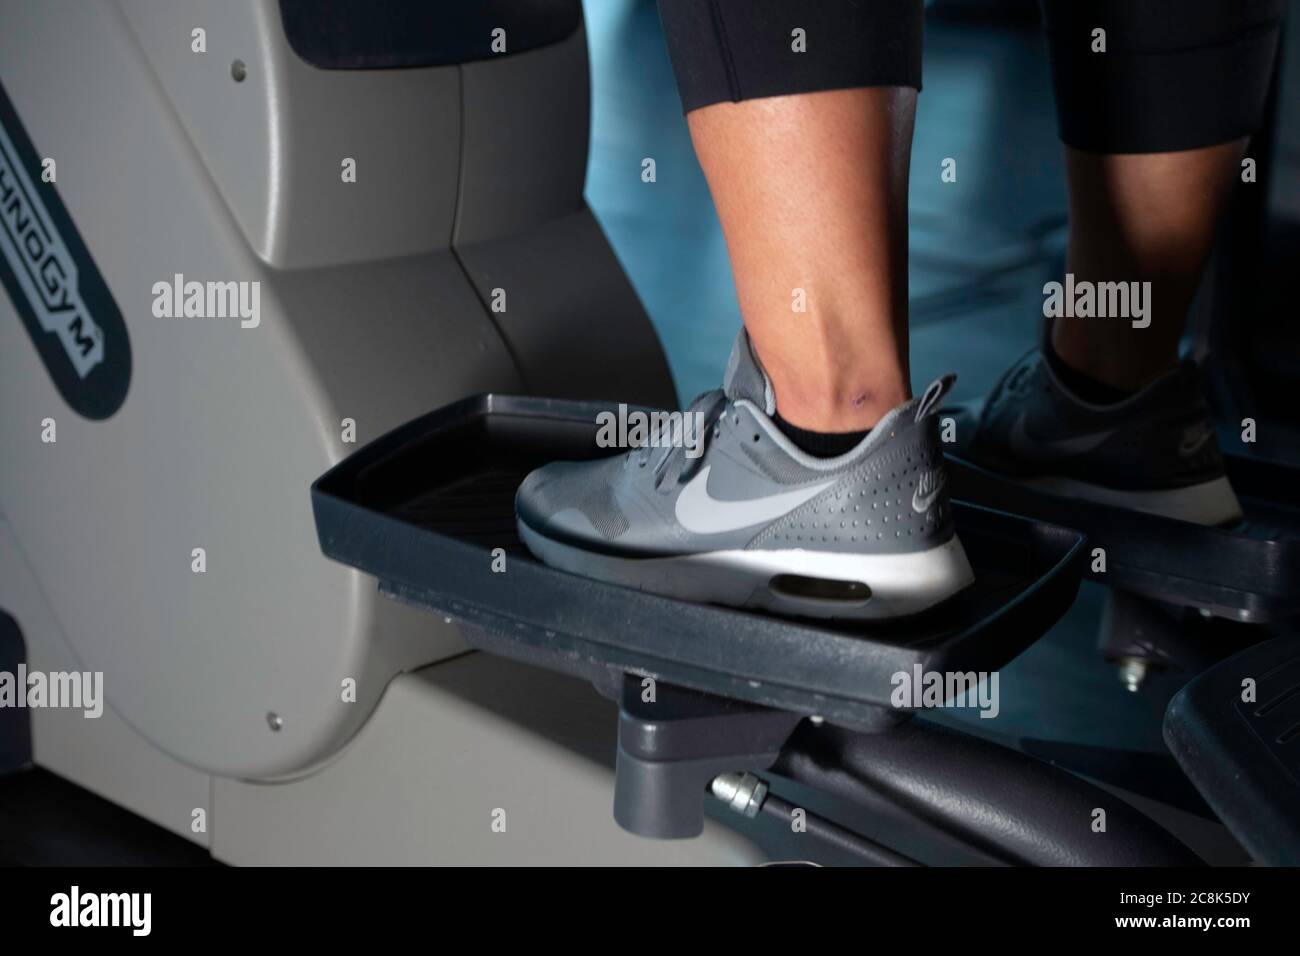 Woman's foot on step machine in Gym Stock Photo